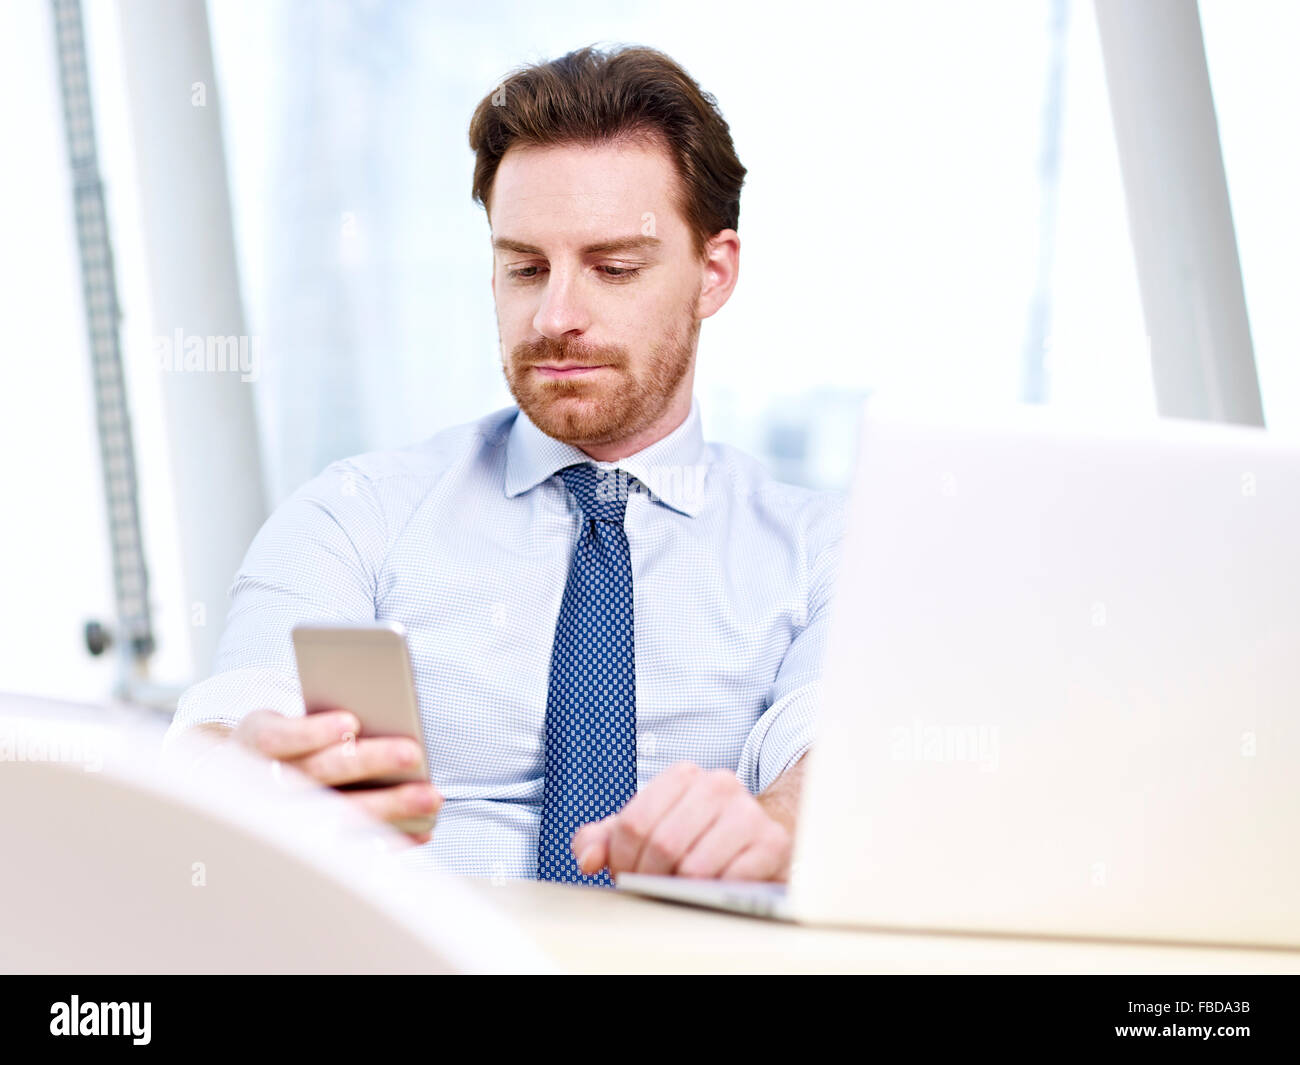 business person using cellphone and laptop in office Stock Photo